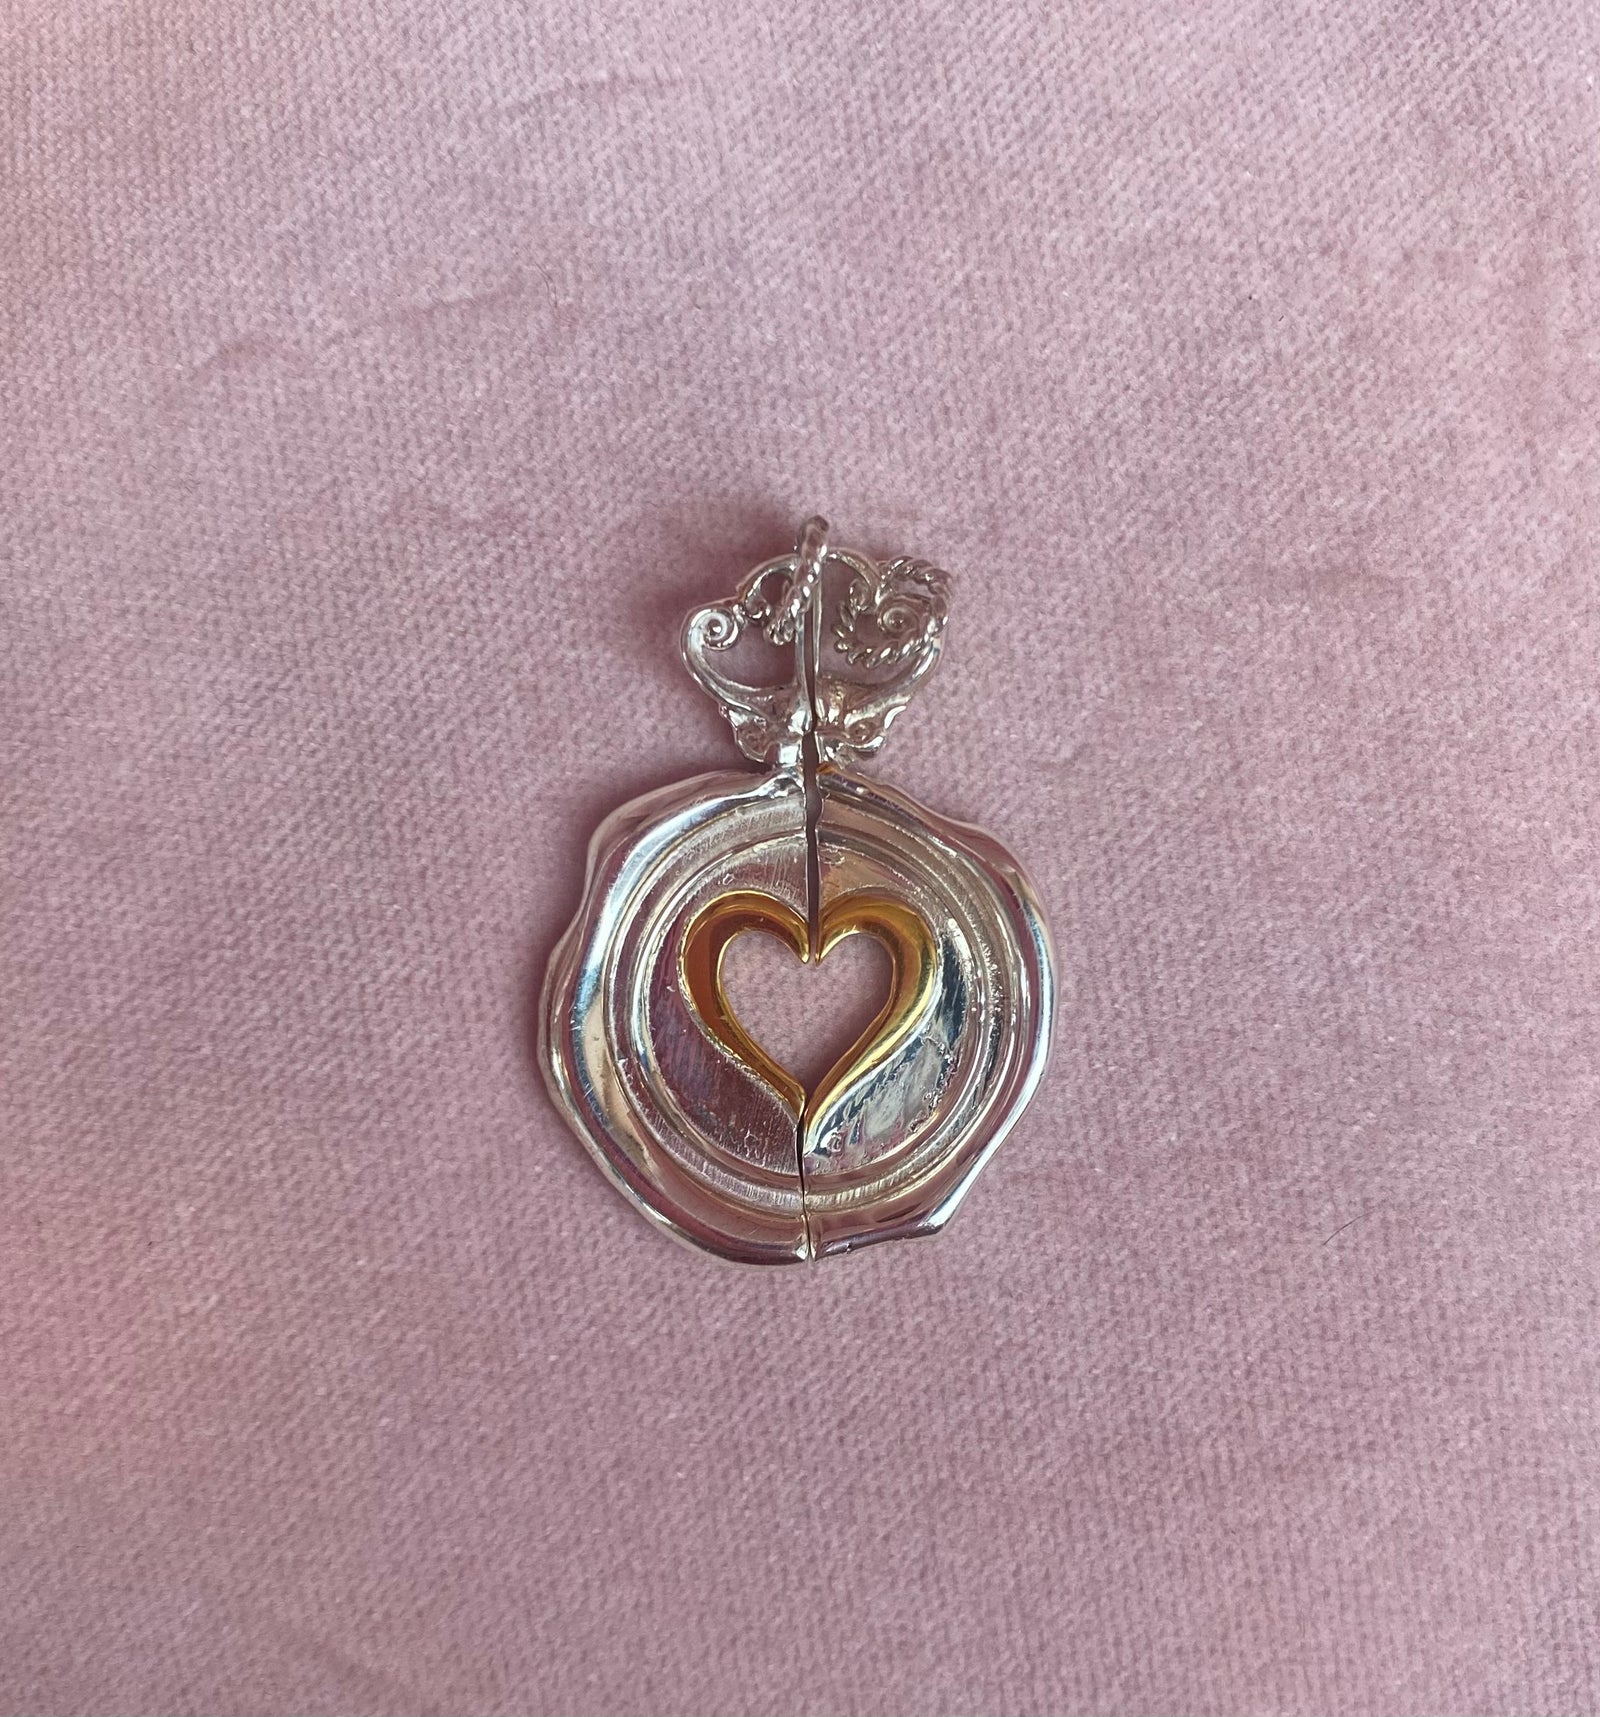 Shared Queen of Hearts Charms